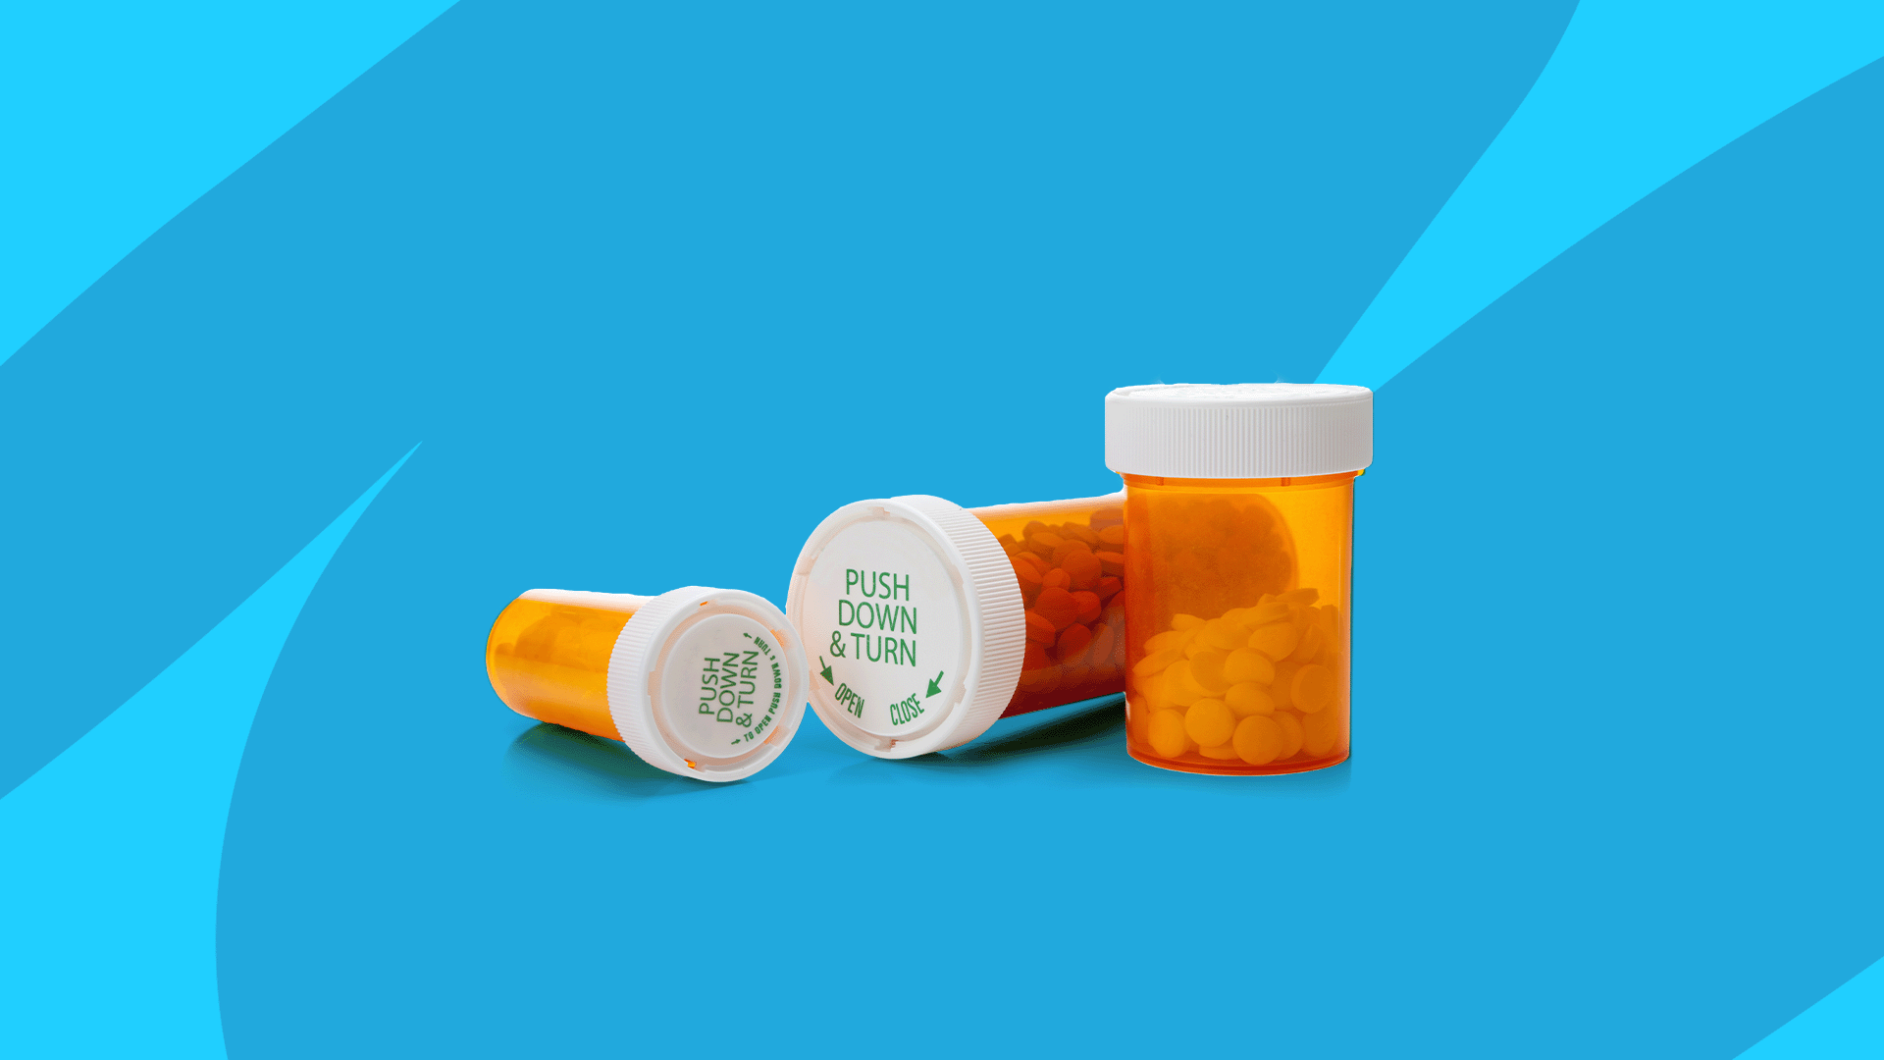 Rx pill bottles: How to get Fycompa without insurance